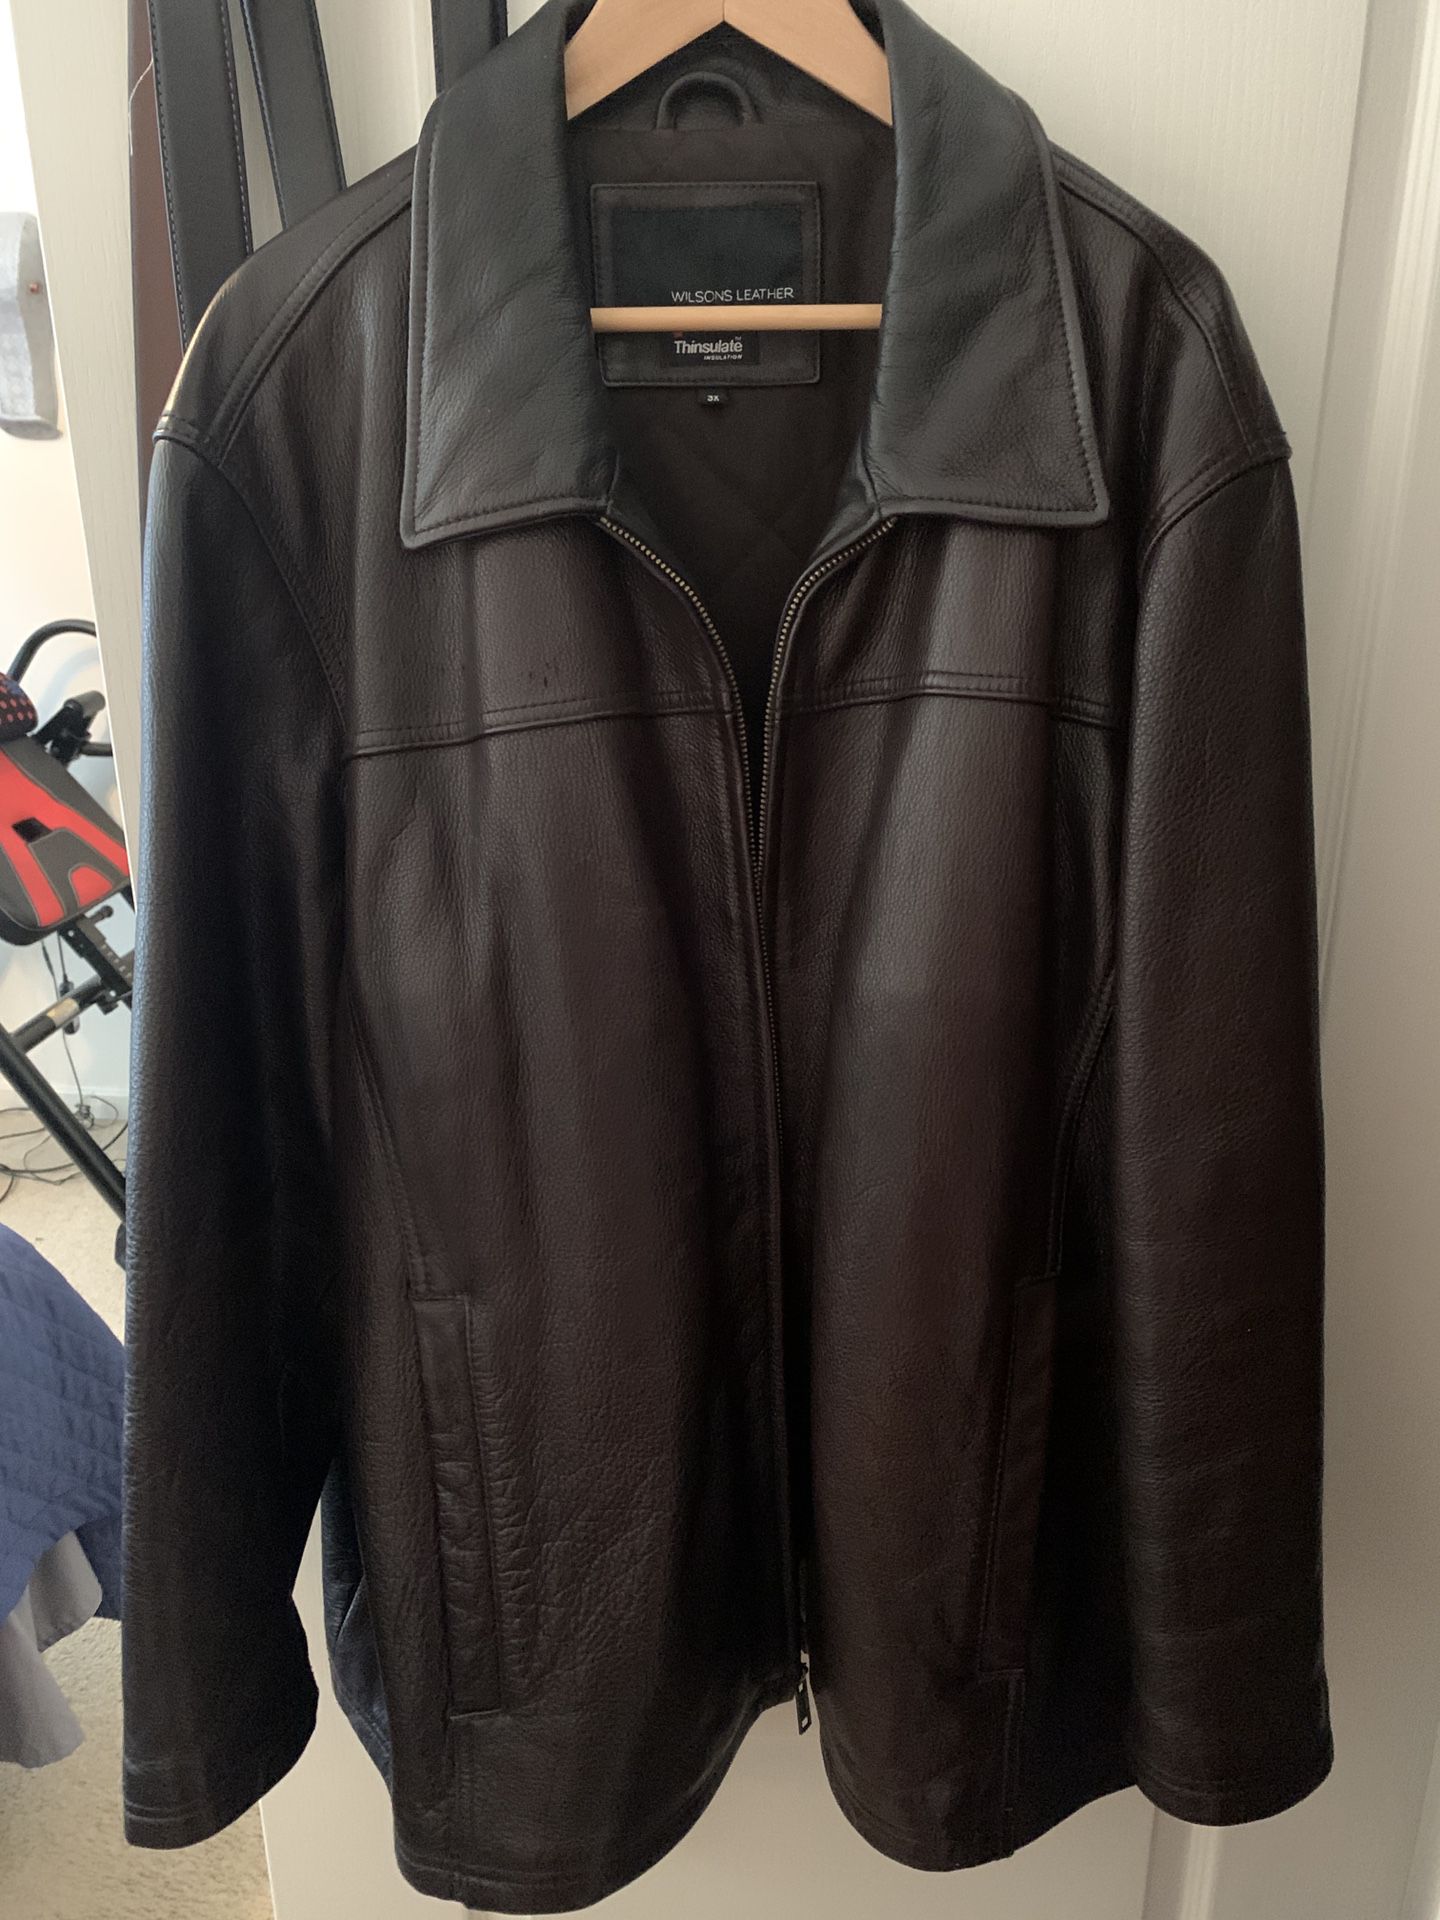 Wilson Leather 3X Brown coat  fits like a 2XL